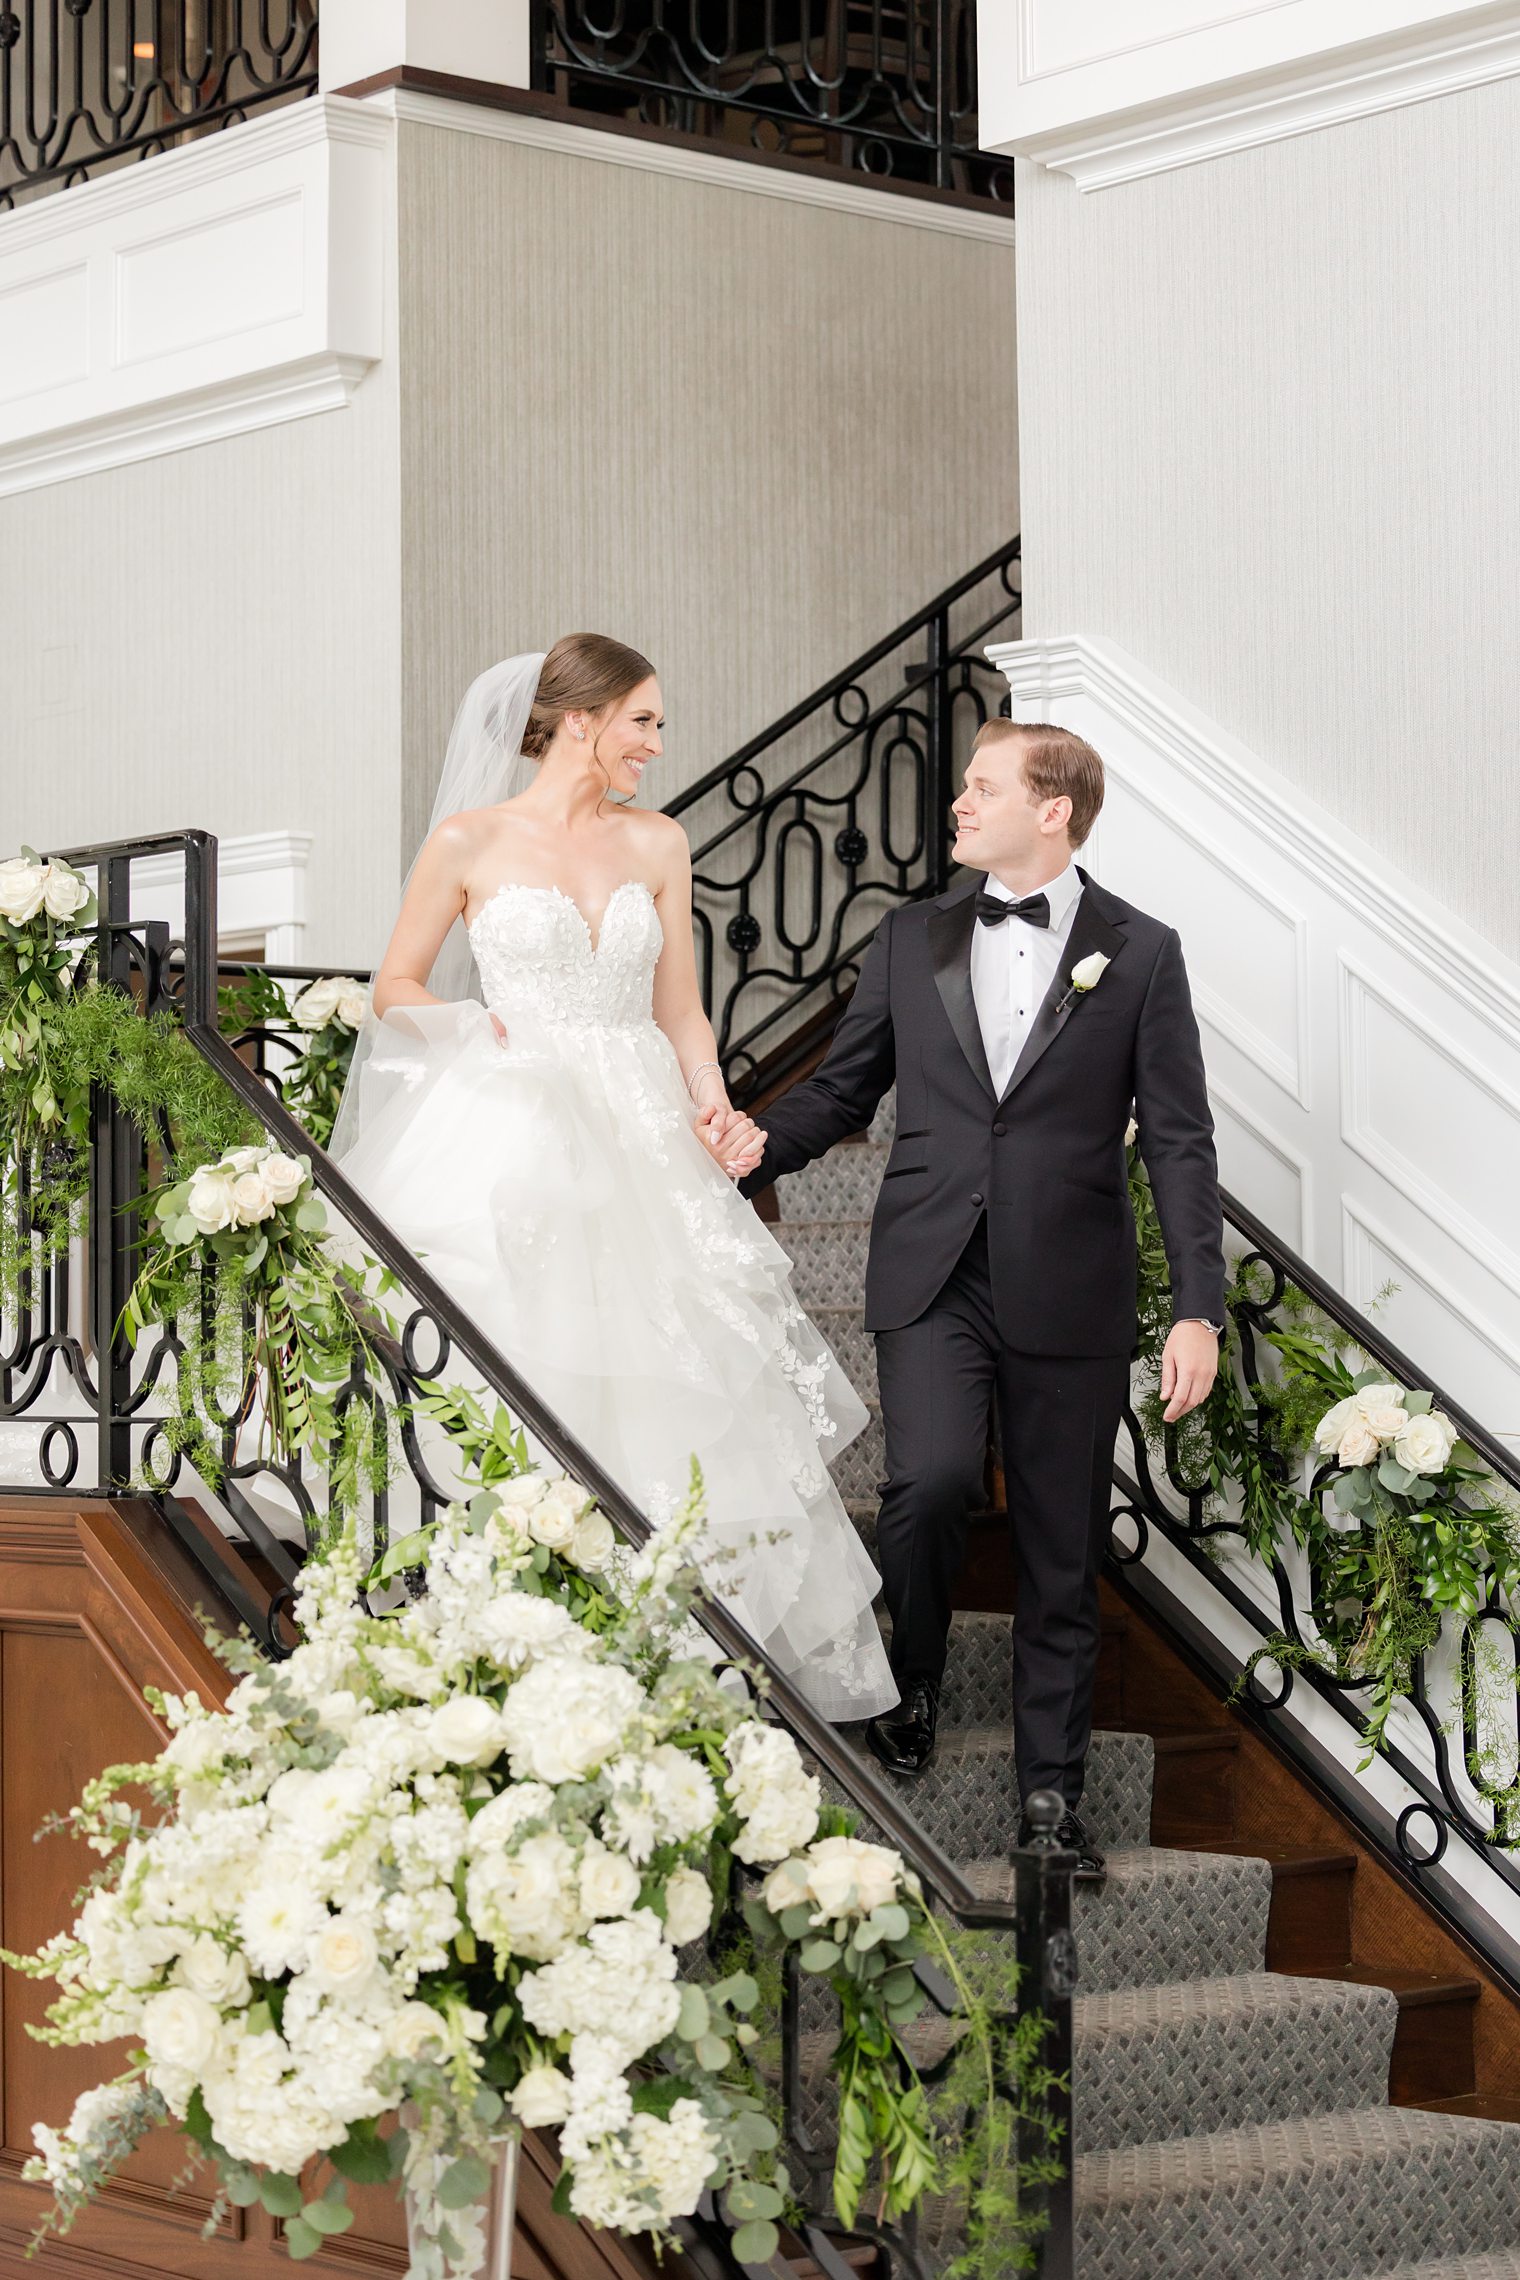 Mr. and Mrs. posing in the stairs